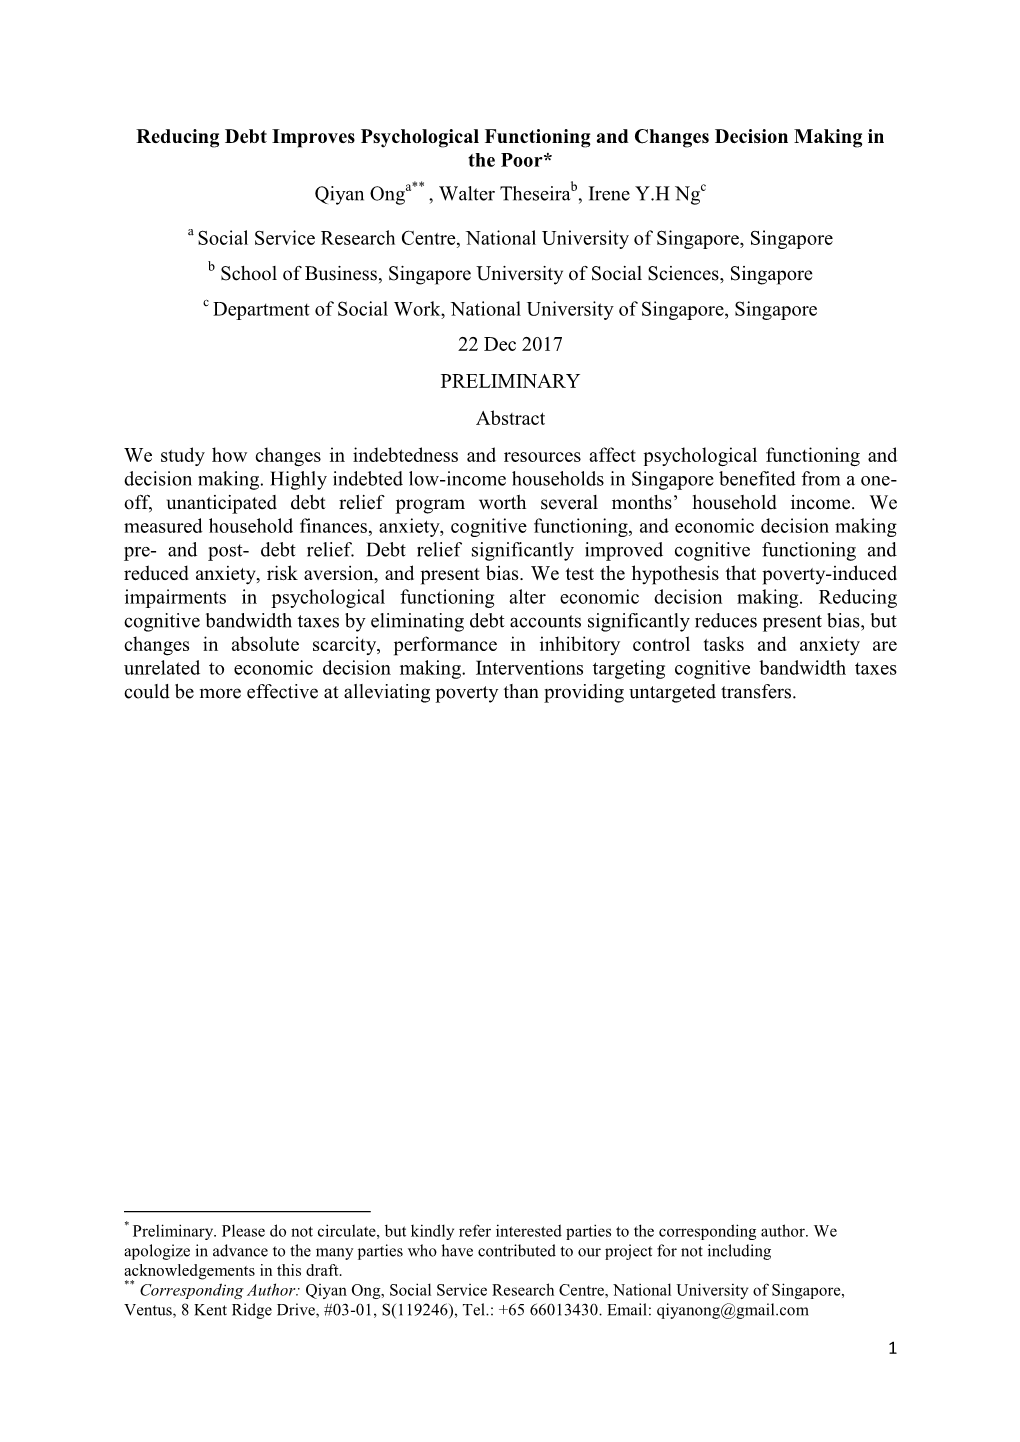 Reducing Debt Improves Psychological Functioning and Changes Decision Making in the Poor* Qiyan Onga** , Walter Theseirab, Irene Y.H Ngc